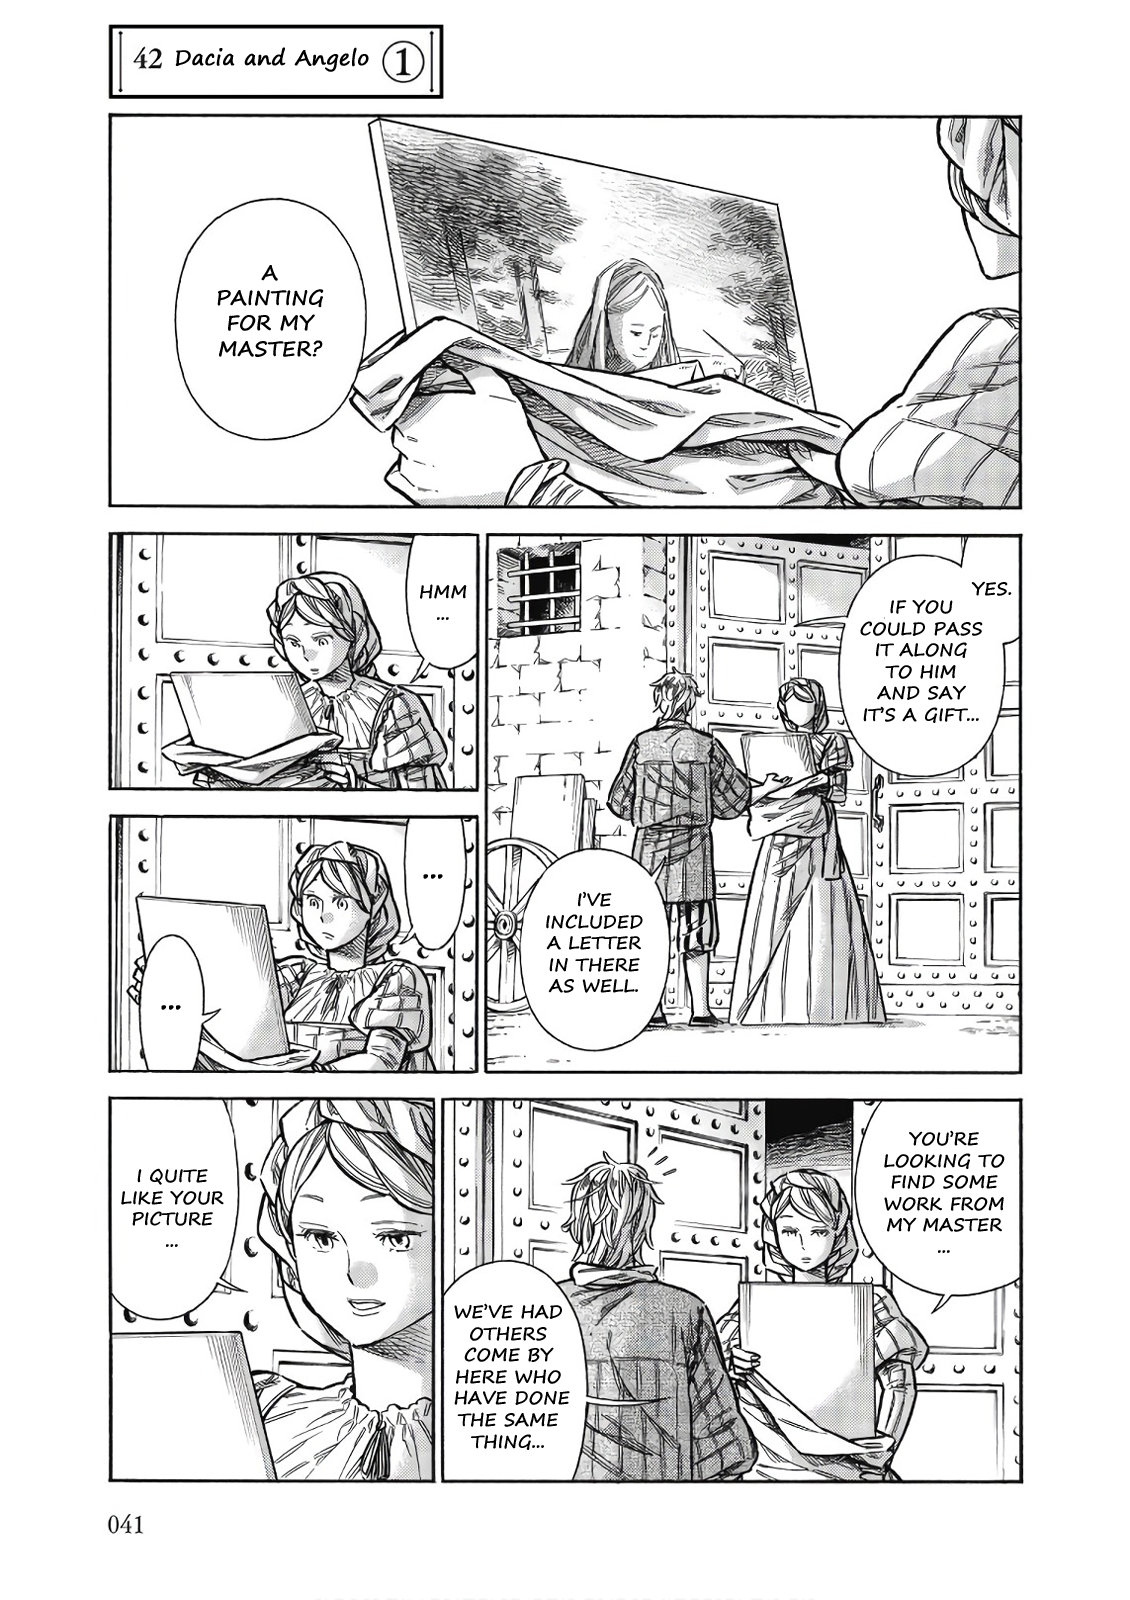 Arte Vol.9 Chapter 42: Dacia And Angelo, Part 1 - Picture 2